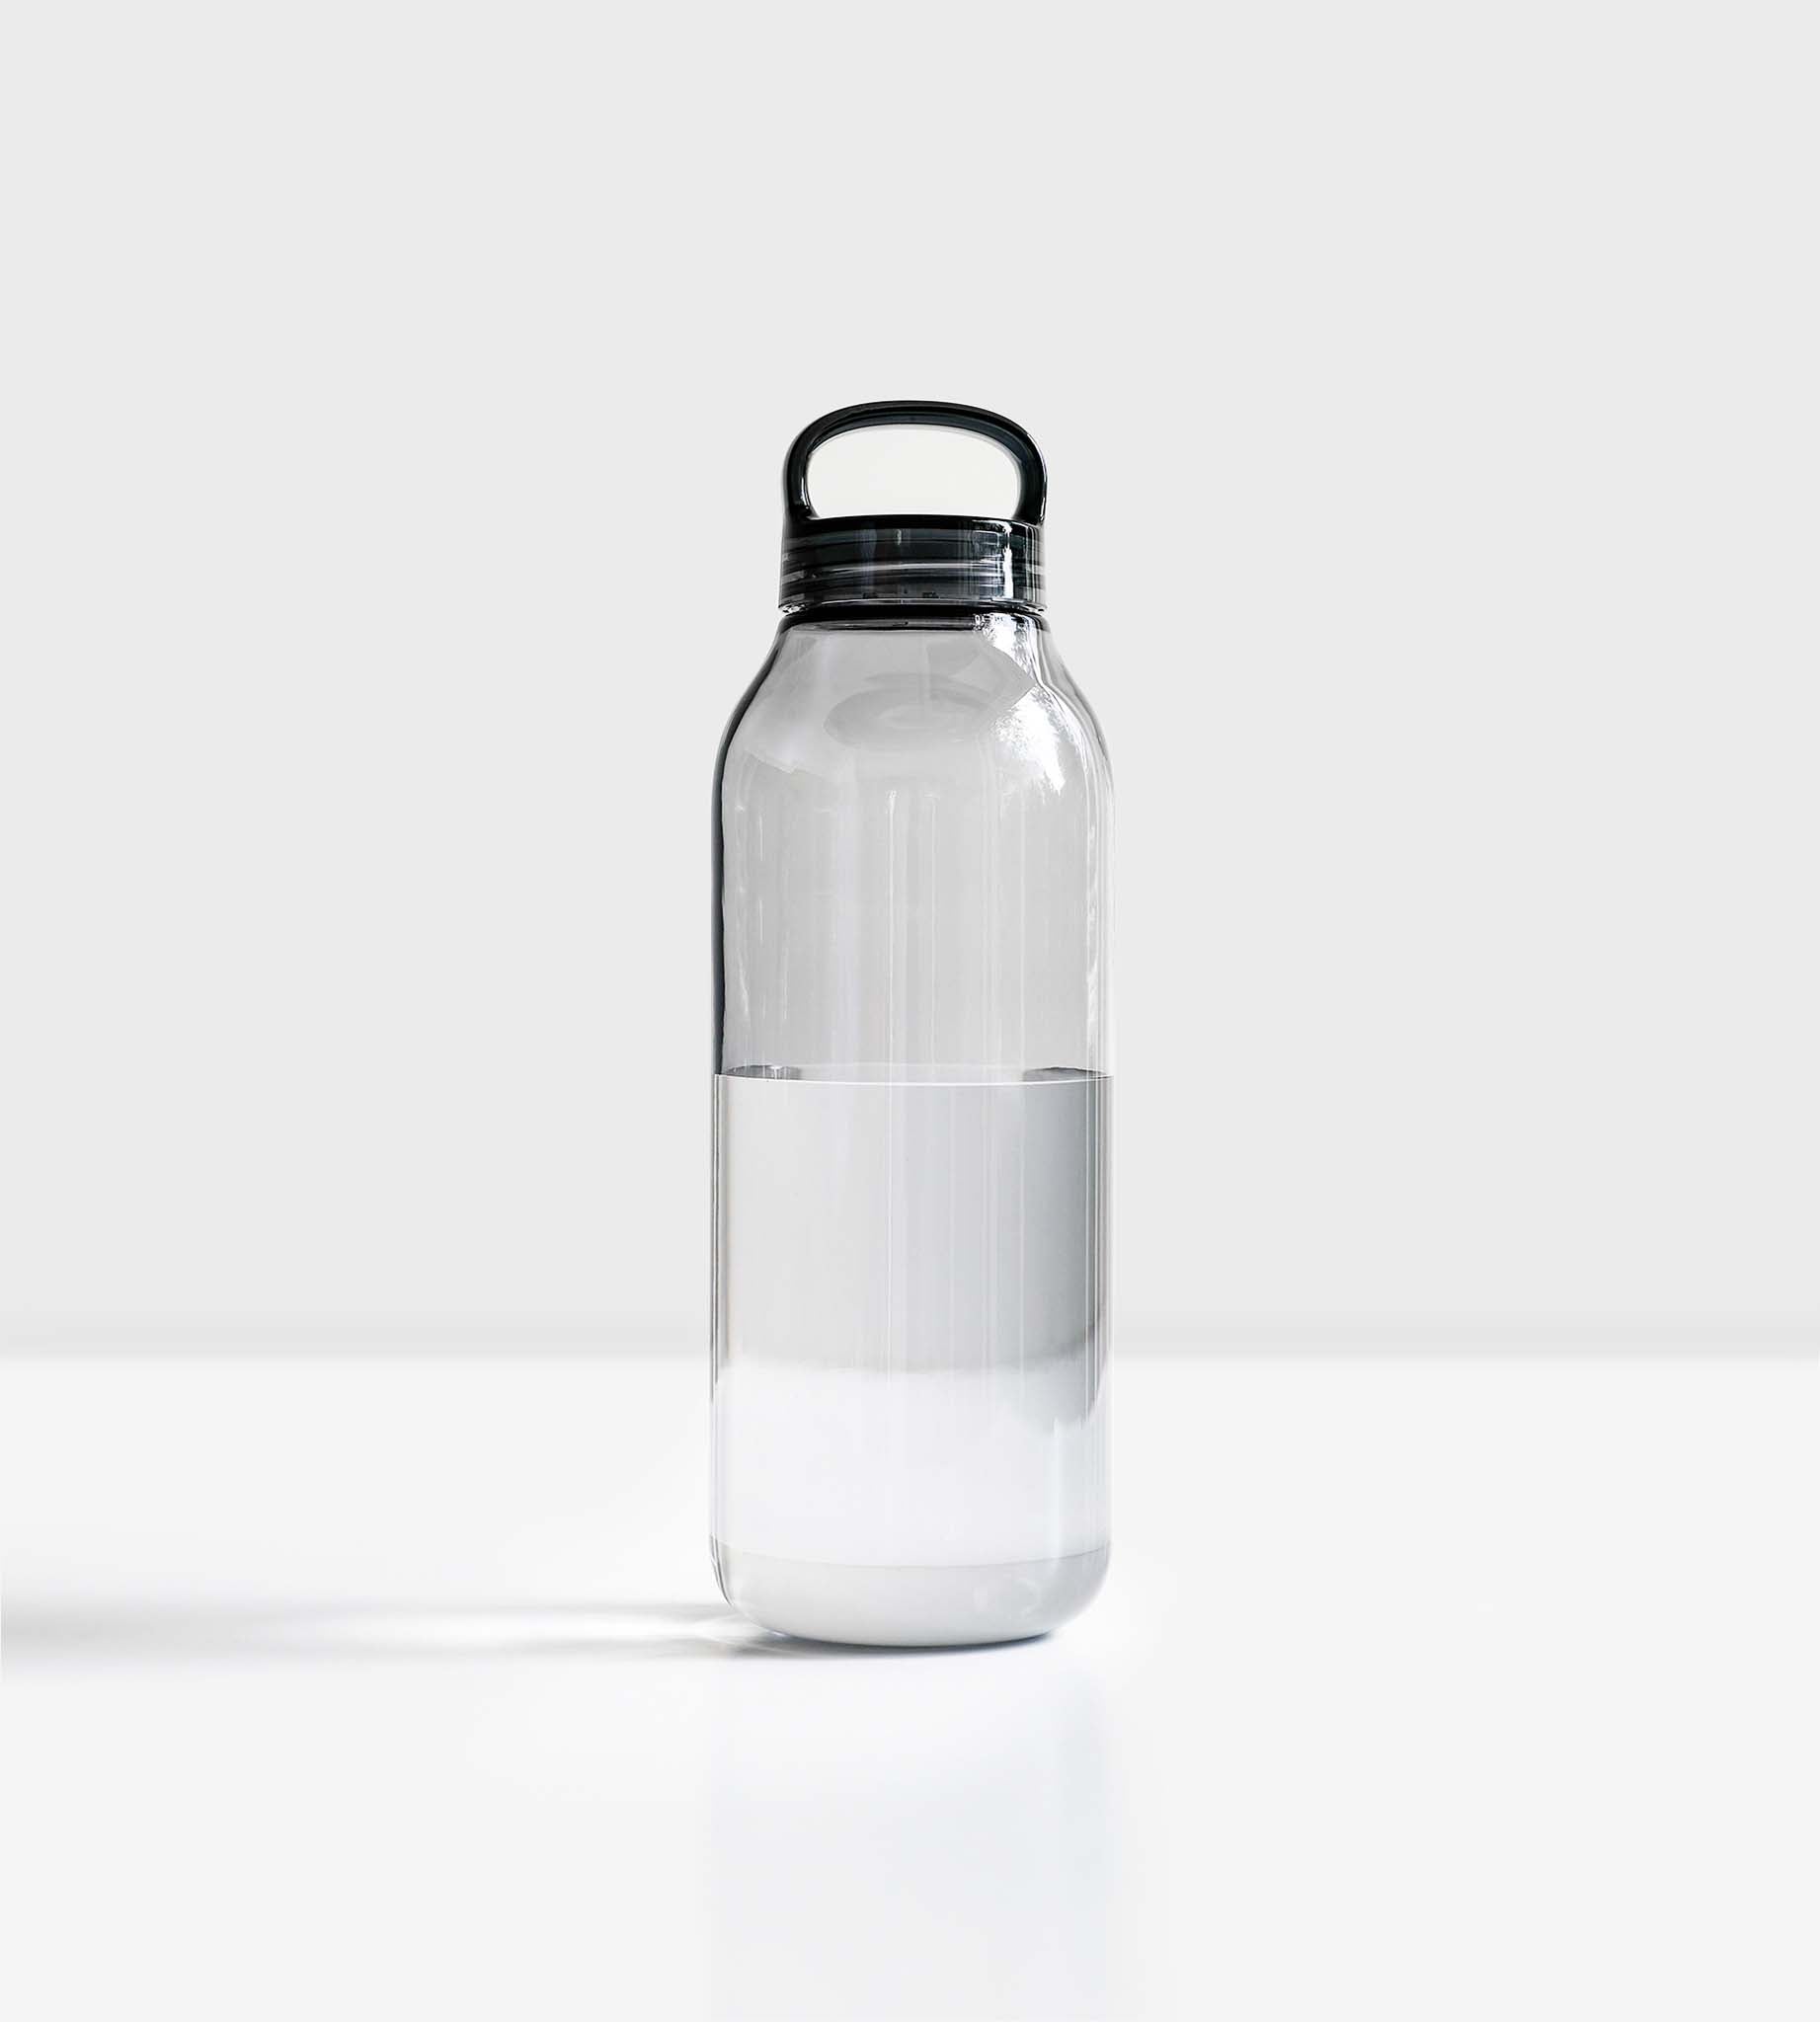 Our staffs' favorite water bottles – KINTO USA, Inc